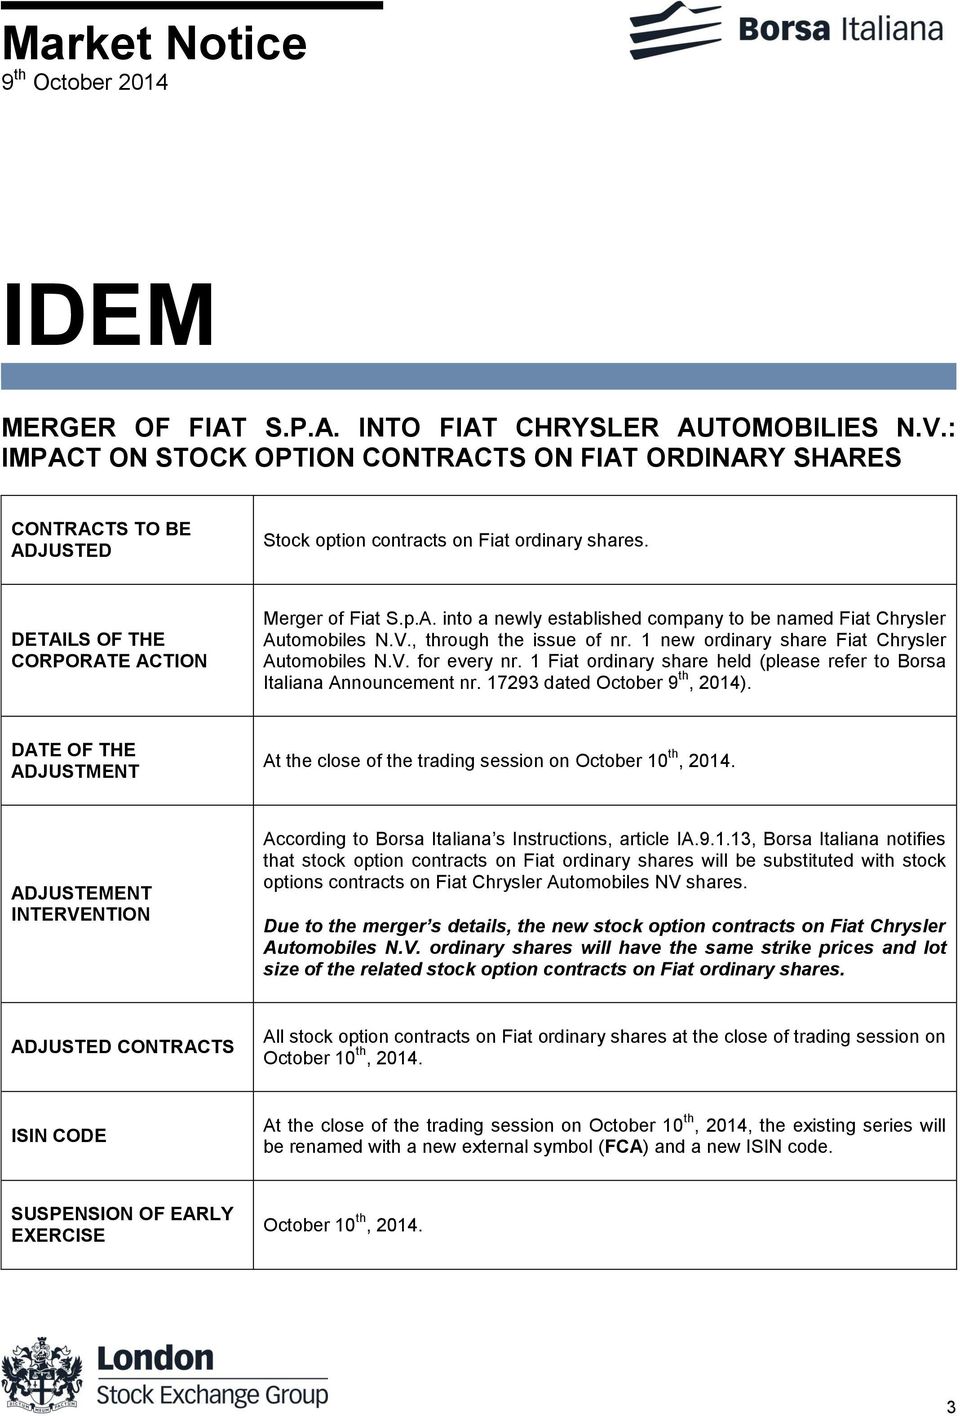 1 new ordinary share Fiat Chrysler Automobiles N.V. for every nr. 1 Fiat ordinary share held (please refer to Borsa Italiana Announcement nr. 17293 dated October 9 th, 2014).